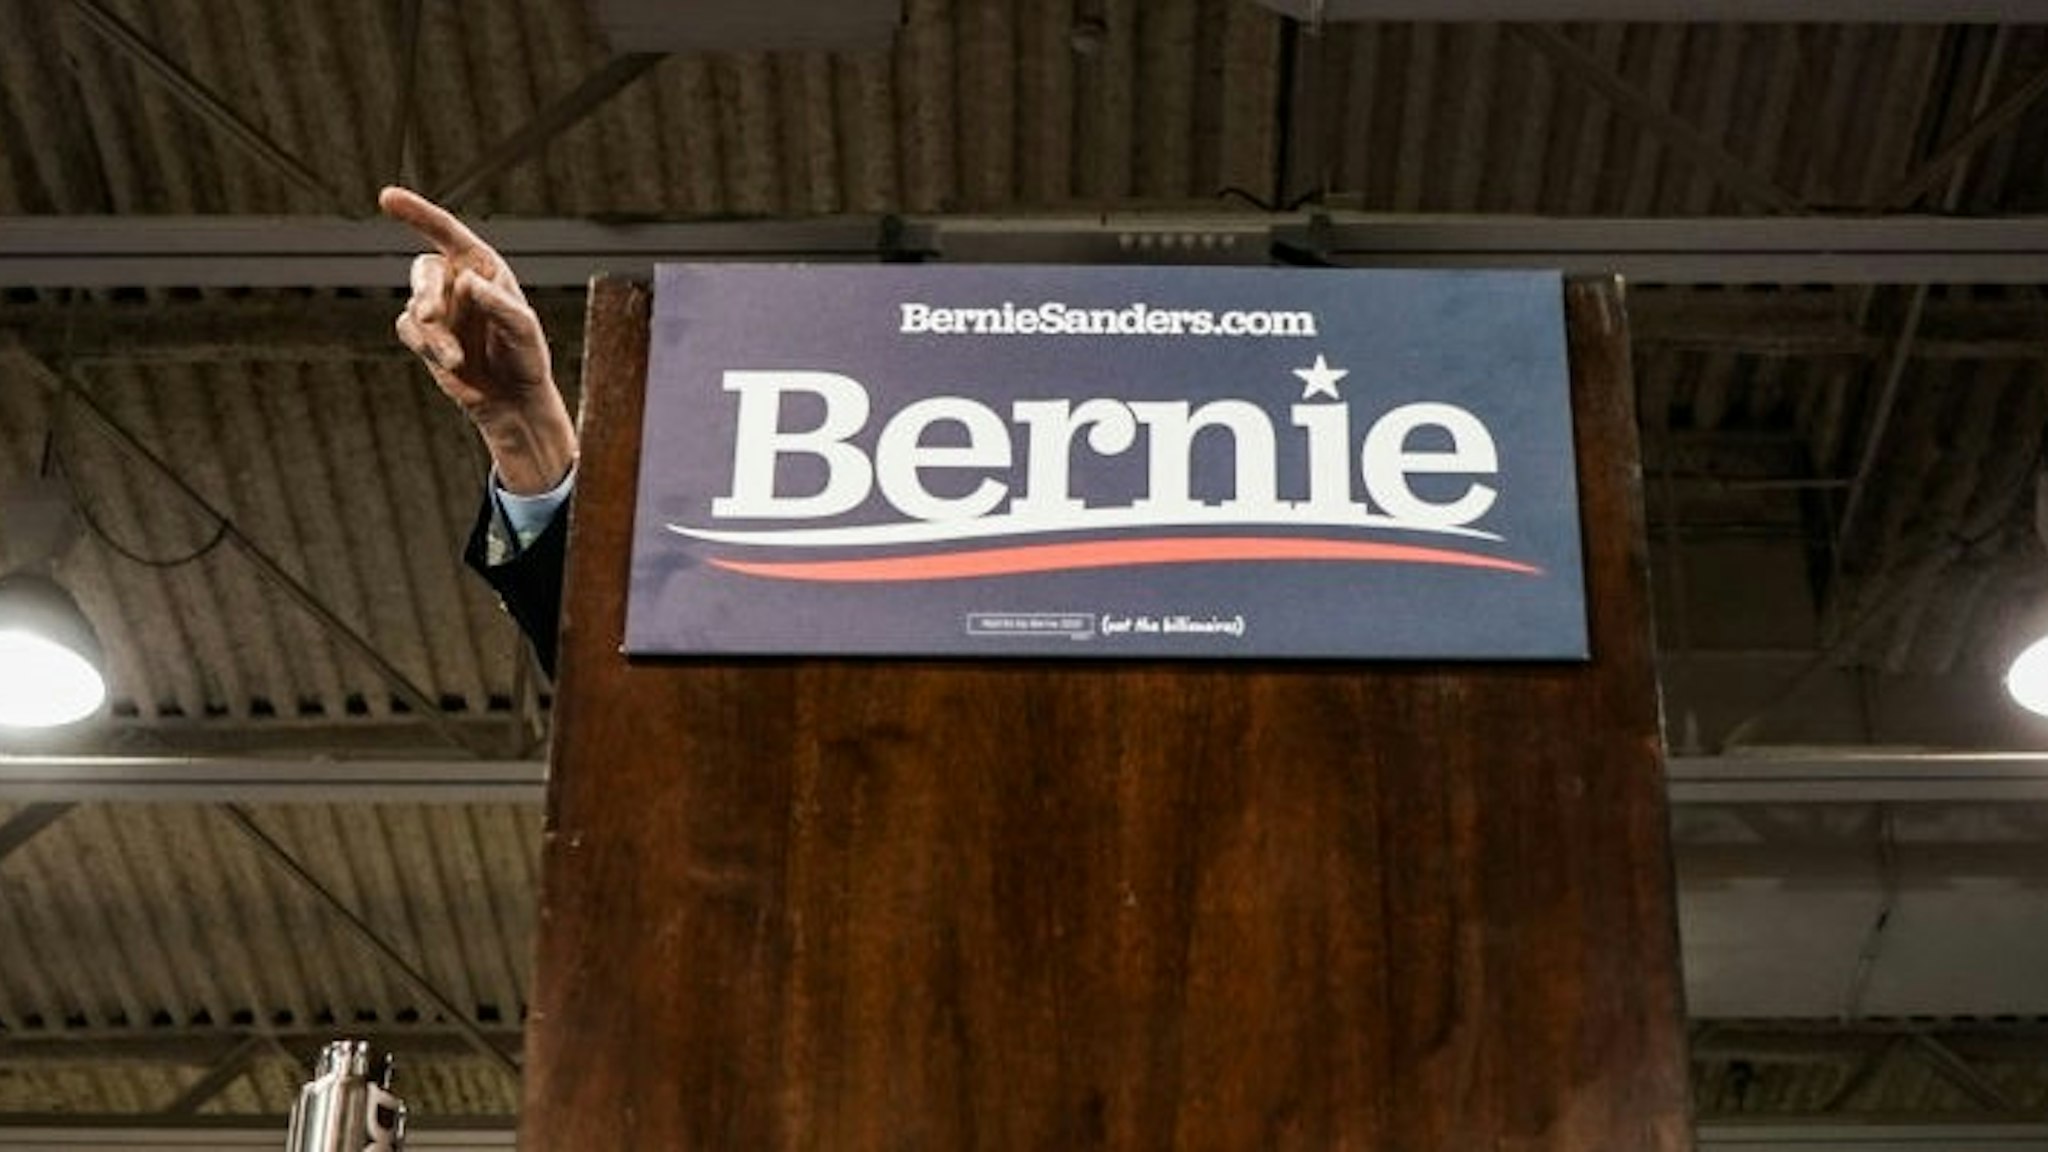 VIRGINIA BEACH, VA - FEBRUARY 29: Sen. Bernie Sanders, I-Vt., Democratic Presidential Candidate speaks to supporters during a rally at Virginia Wesleyan University Convocation Hall on Saturday, February 29, 2020 in Virginia Beach, VA. (Photo by